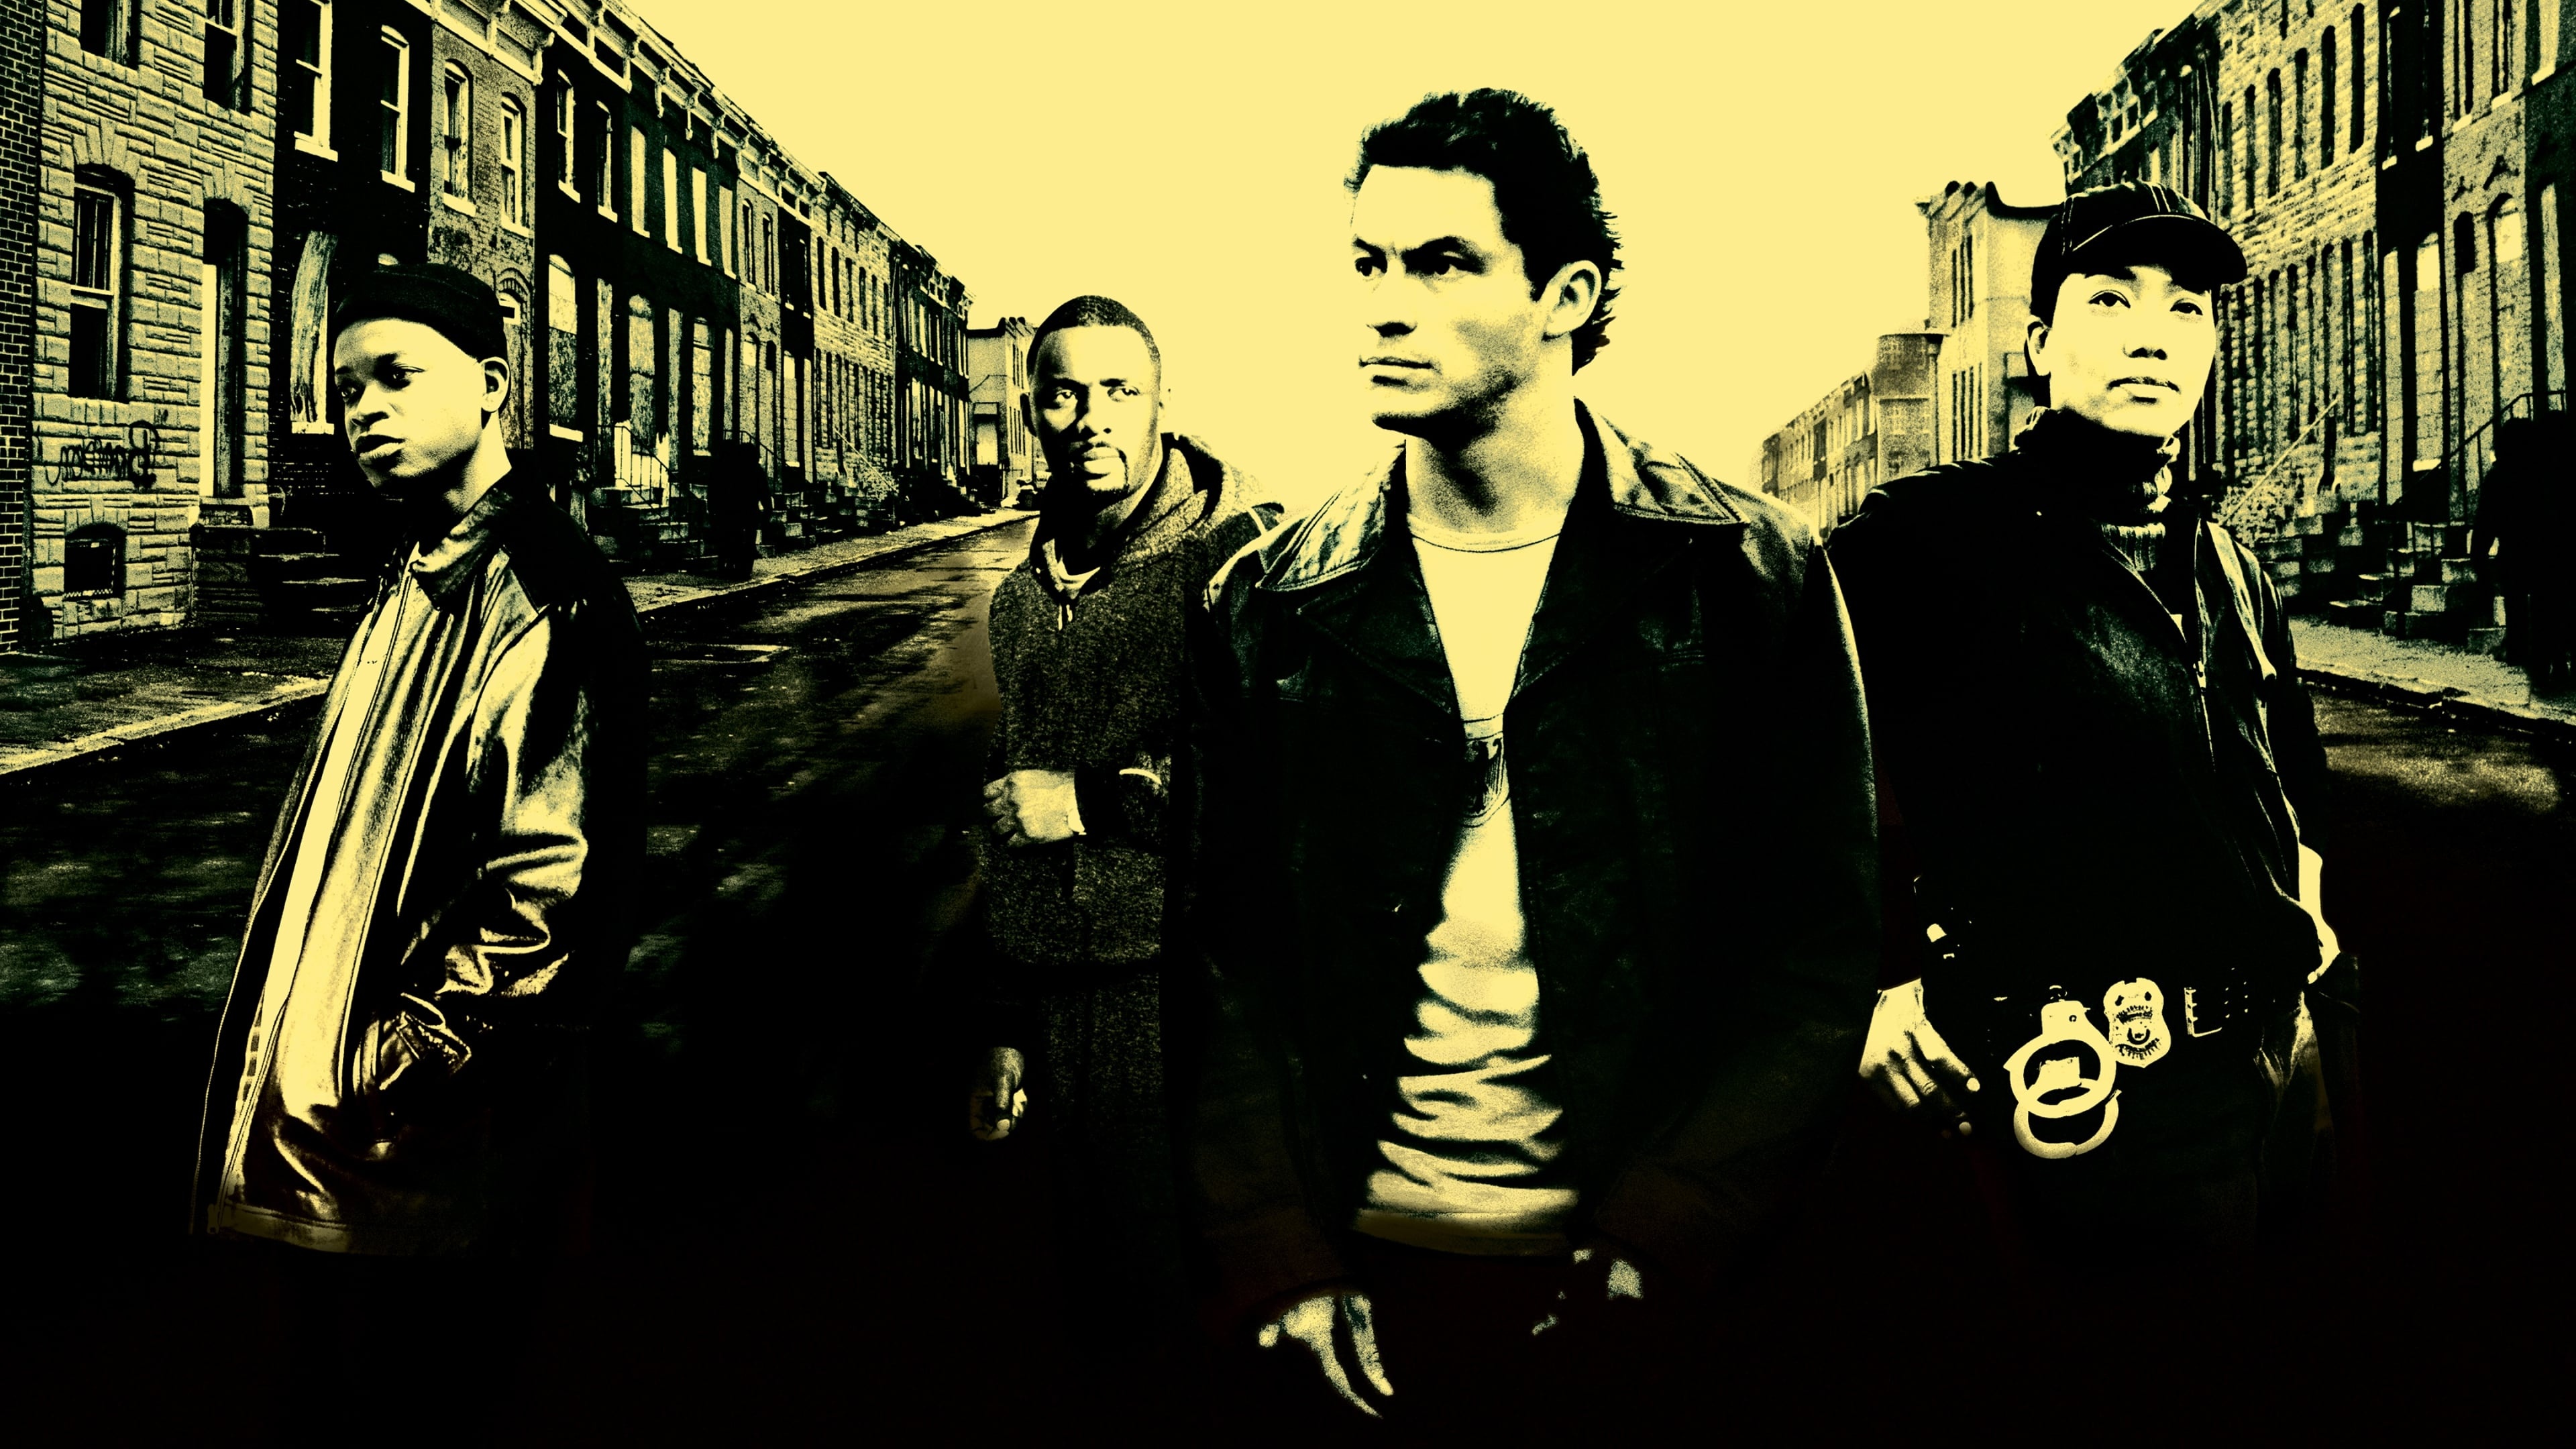 The Wire 4k wallpapers, Authentic portrayal, Compelling characters, Gritty urban landscape, 3840x2160 4K Desktop